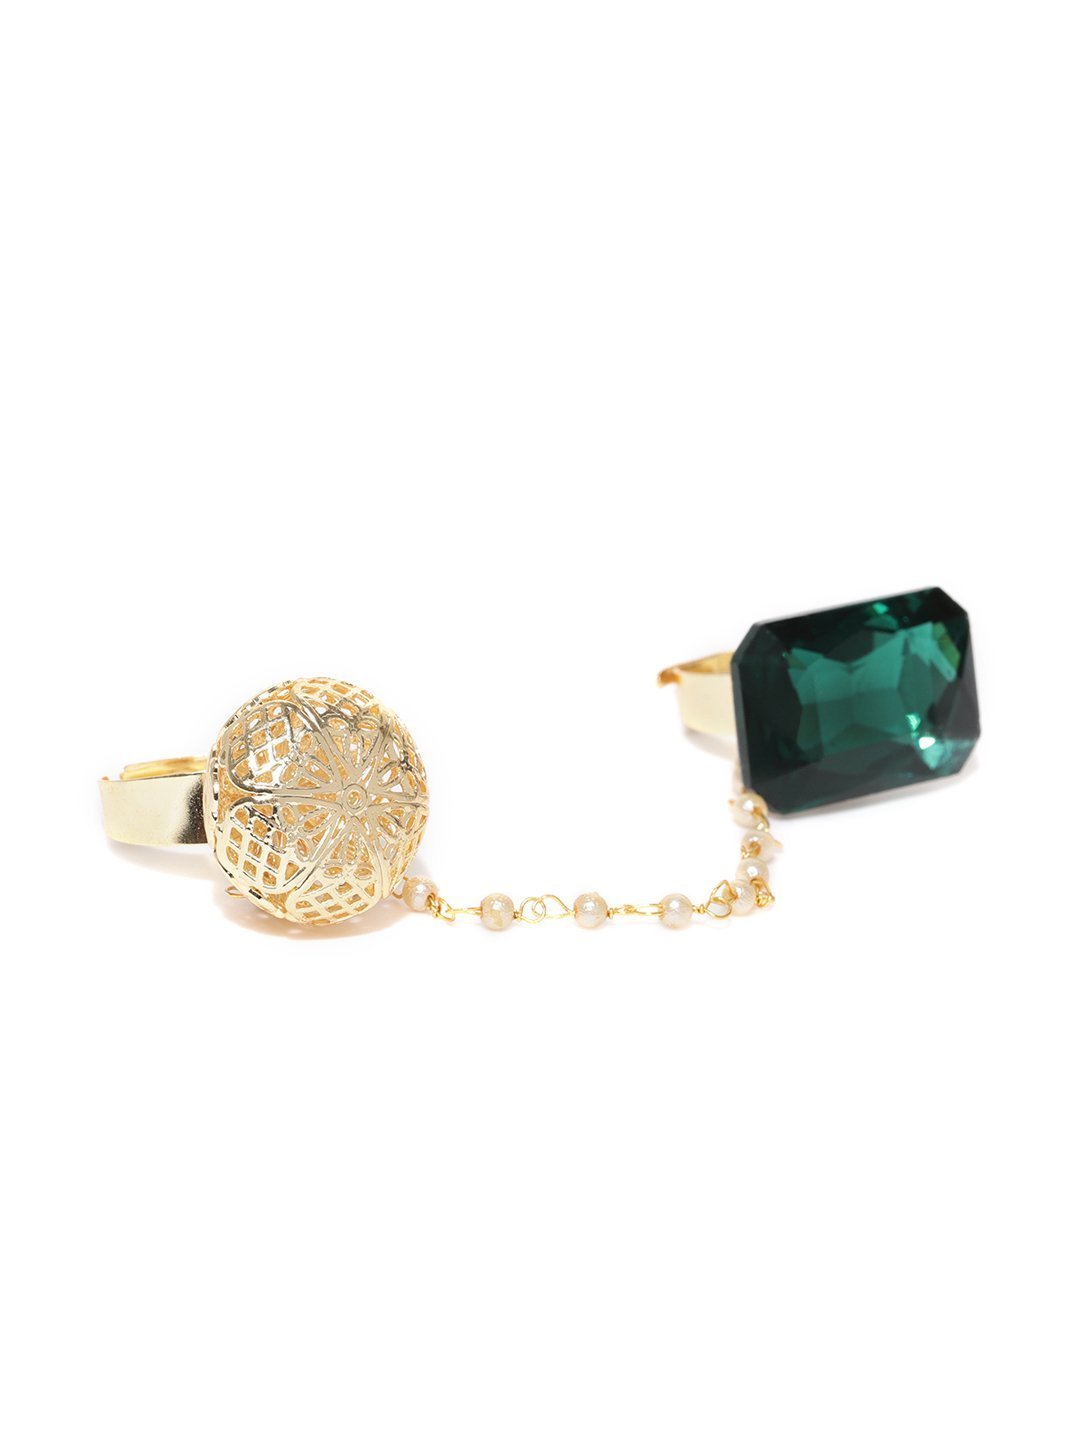 Women's Gold-Toned And Green Stone-Studded Dual Finger Adjustable Finger Ring For Women And Girls - Priyaasi